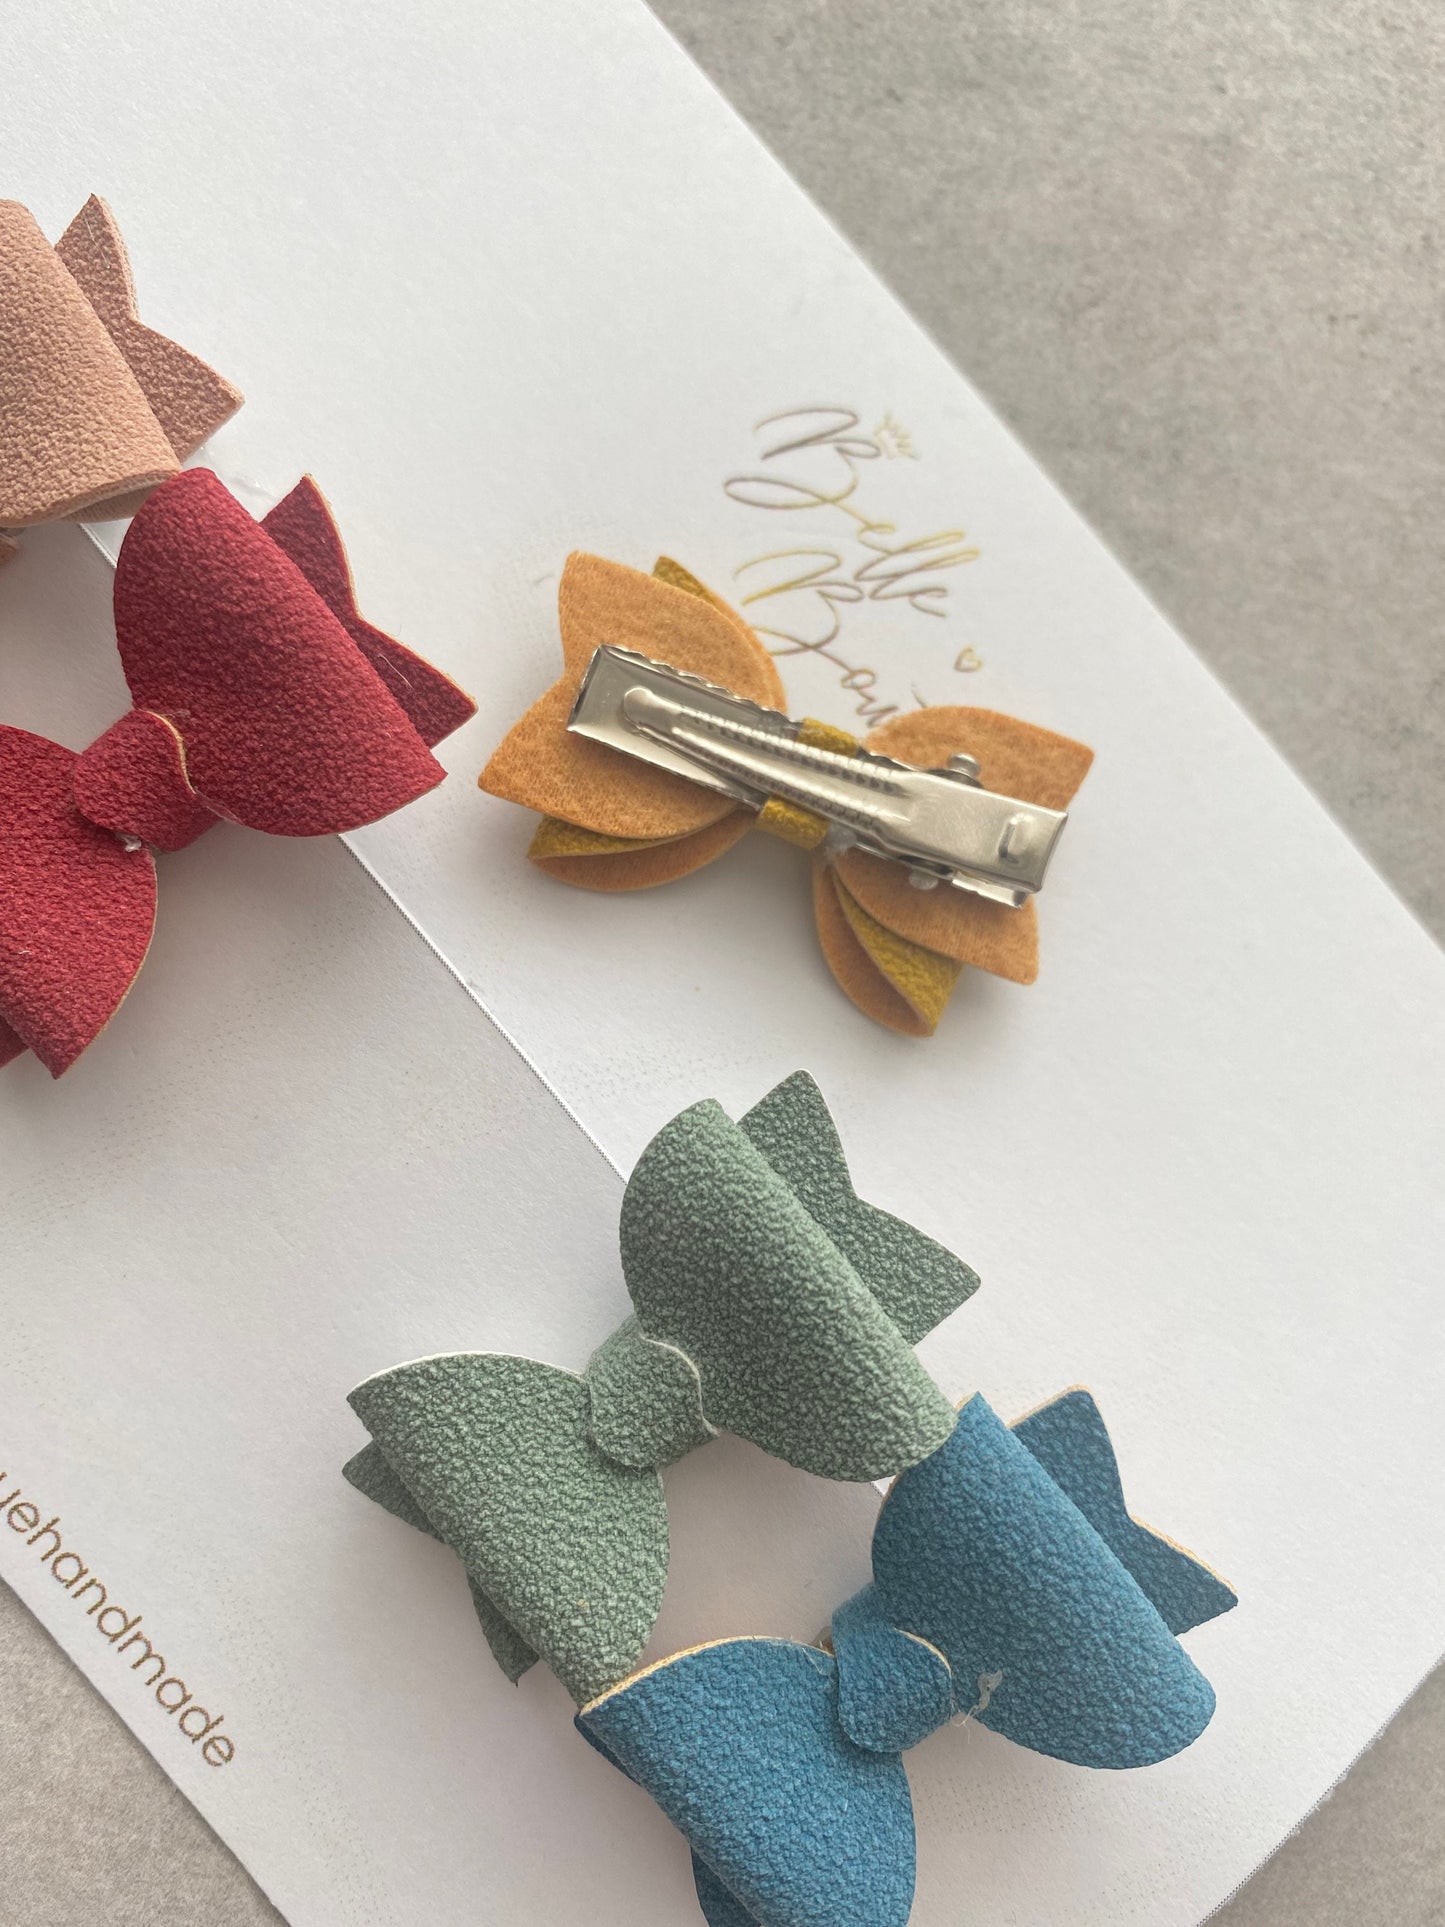 Mini Bow fringe clips - small clips - mini clips - Hair clips for girls - suedette - toddler hair clips - baby hair clips - Autumn Colours